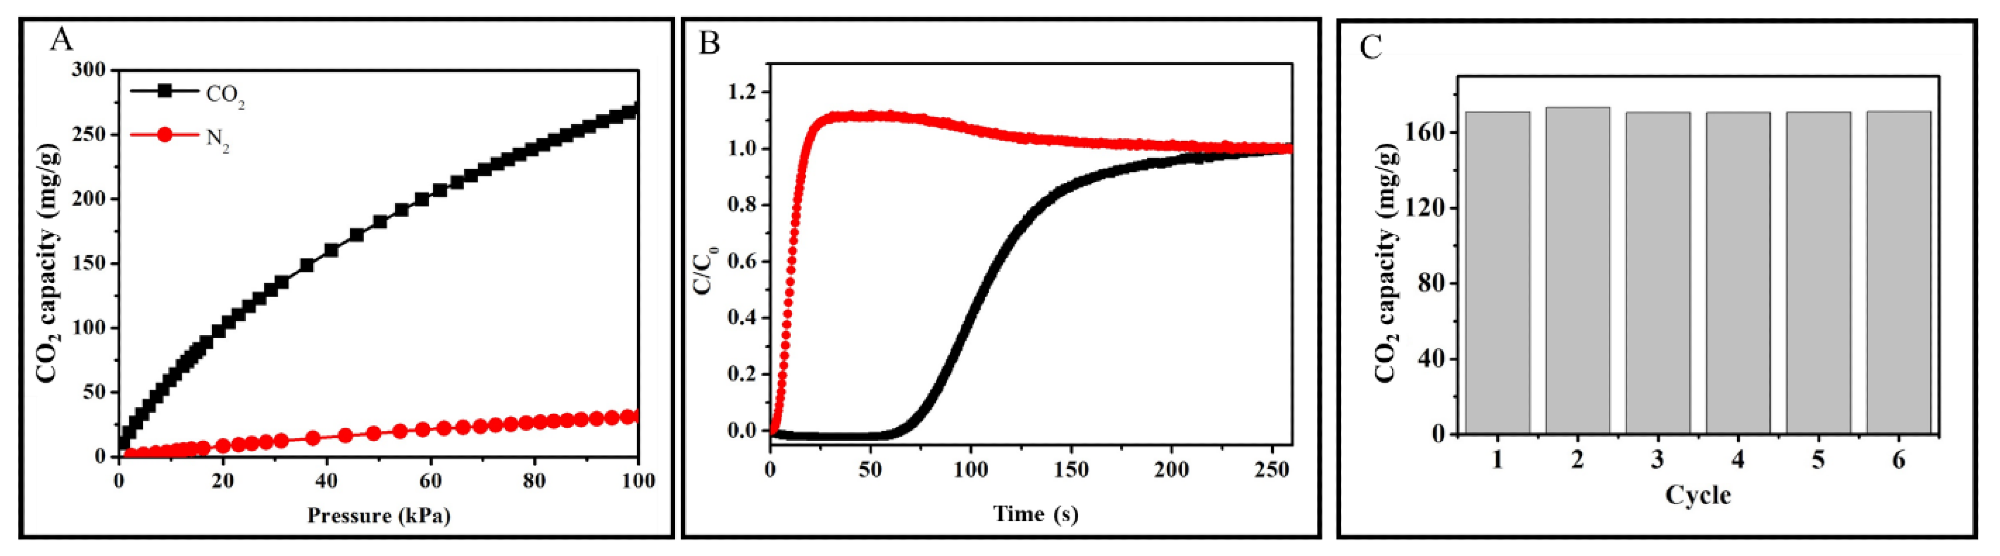 CO2 and N2 adsorption isothermals of ACRF-40C-85%-800 at 273 K (A); breakthrough curves of CO2/N2 of ACRF-40C-85-800 at 298 K (B); CO2 capacity at 298 K of ACRF-40C-85%-800 for six cycles (C).